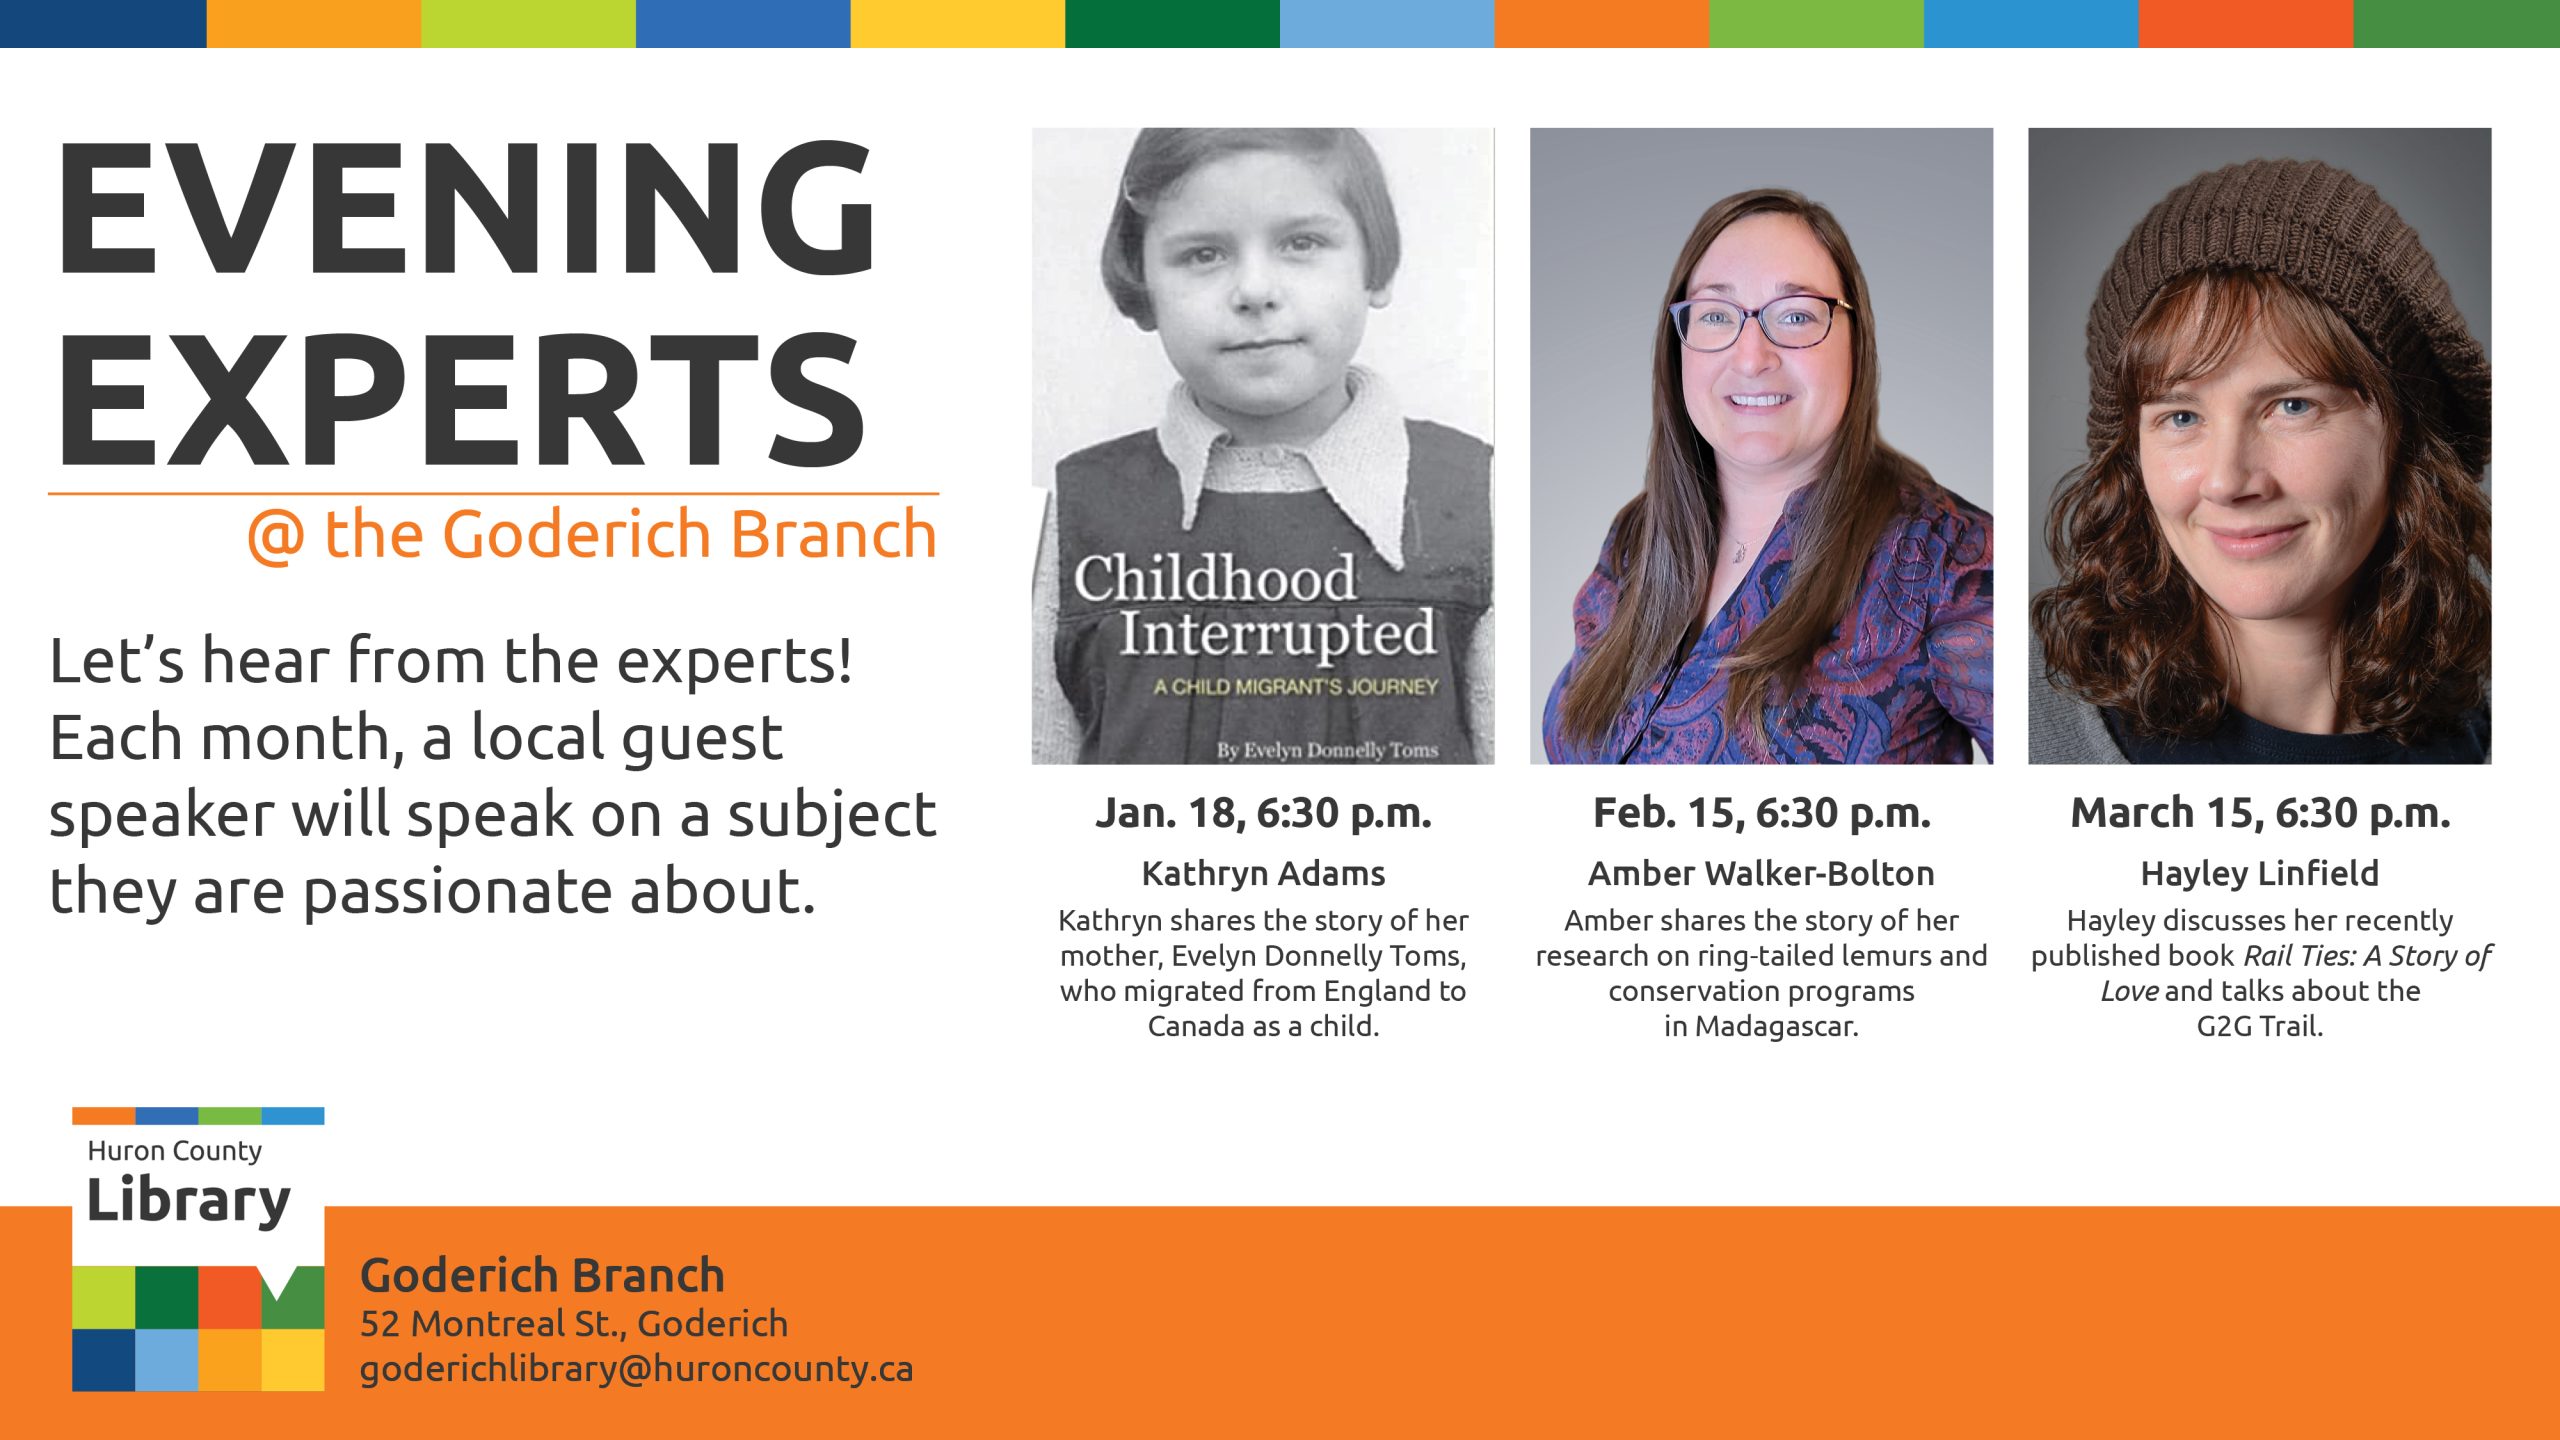 Images of guest speakers along with text promoting evening experts at the Goderich Branch